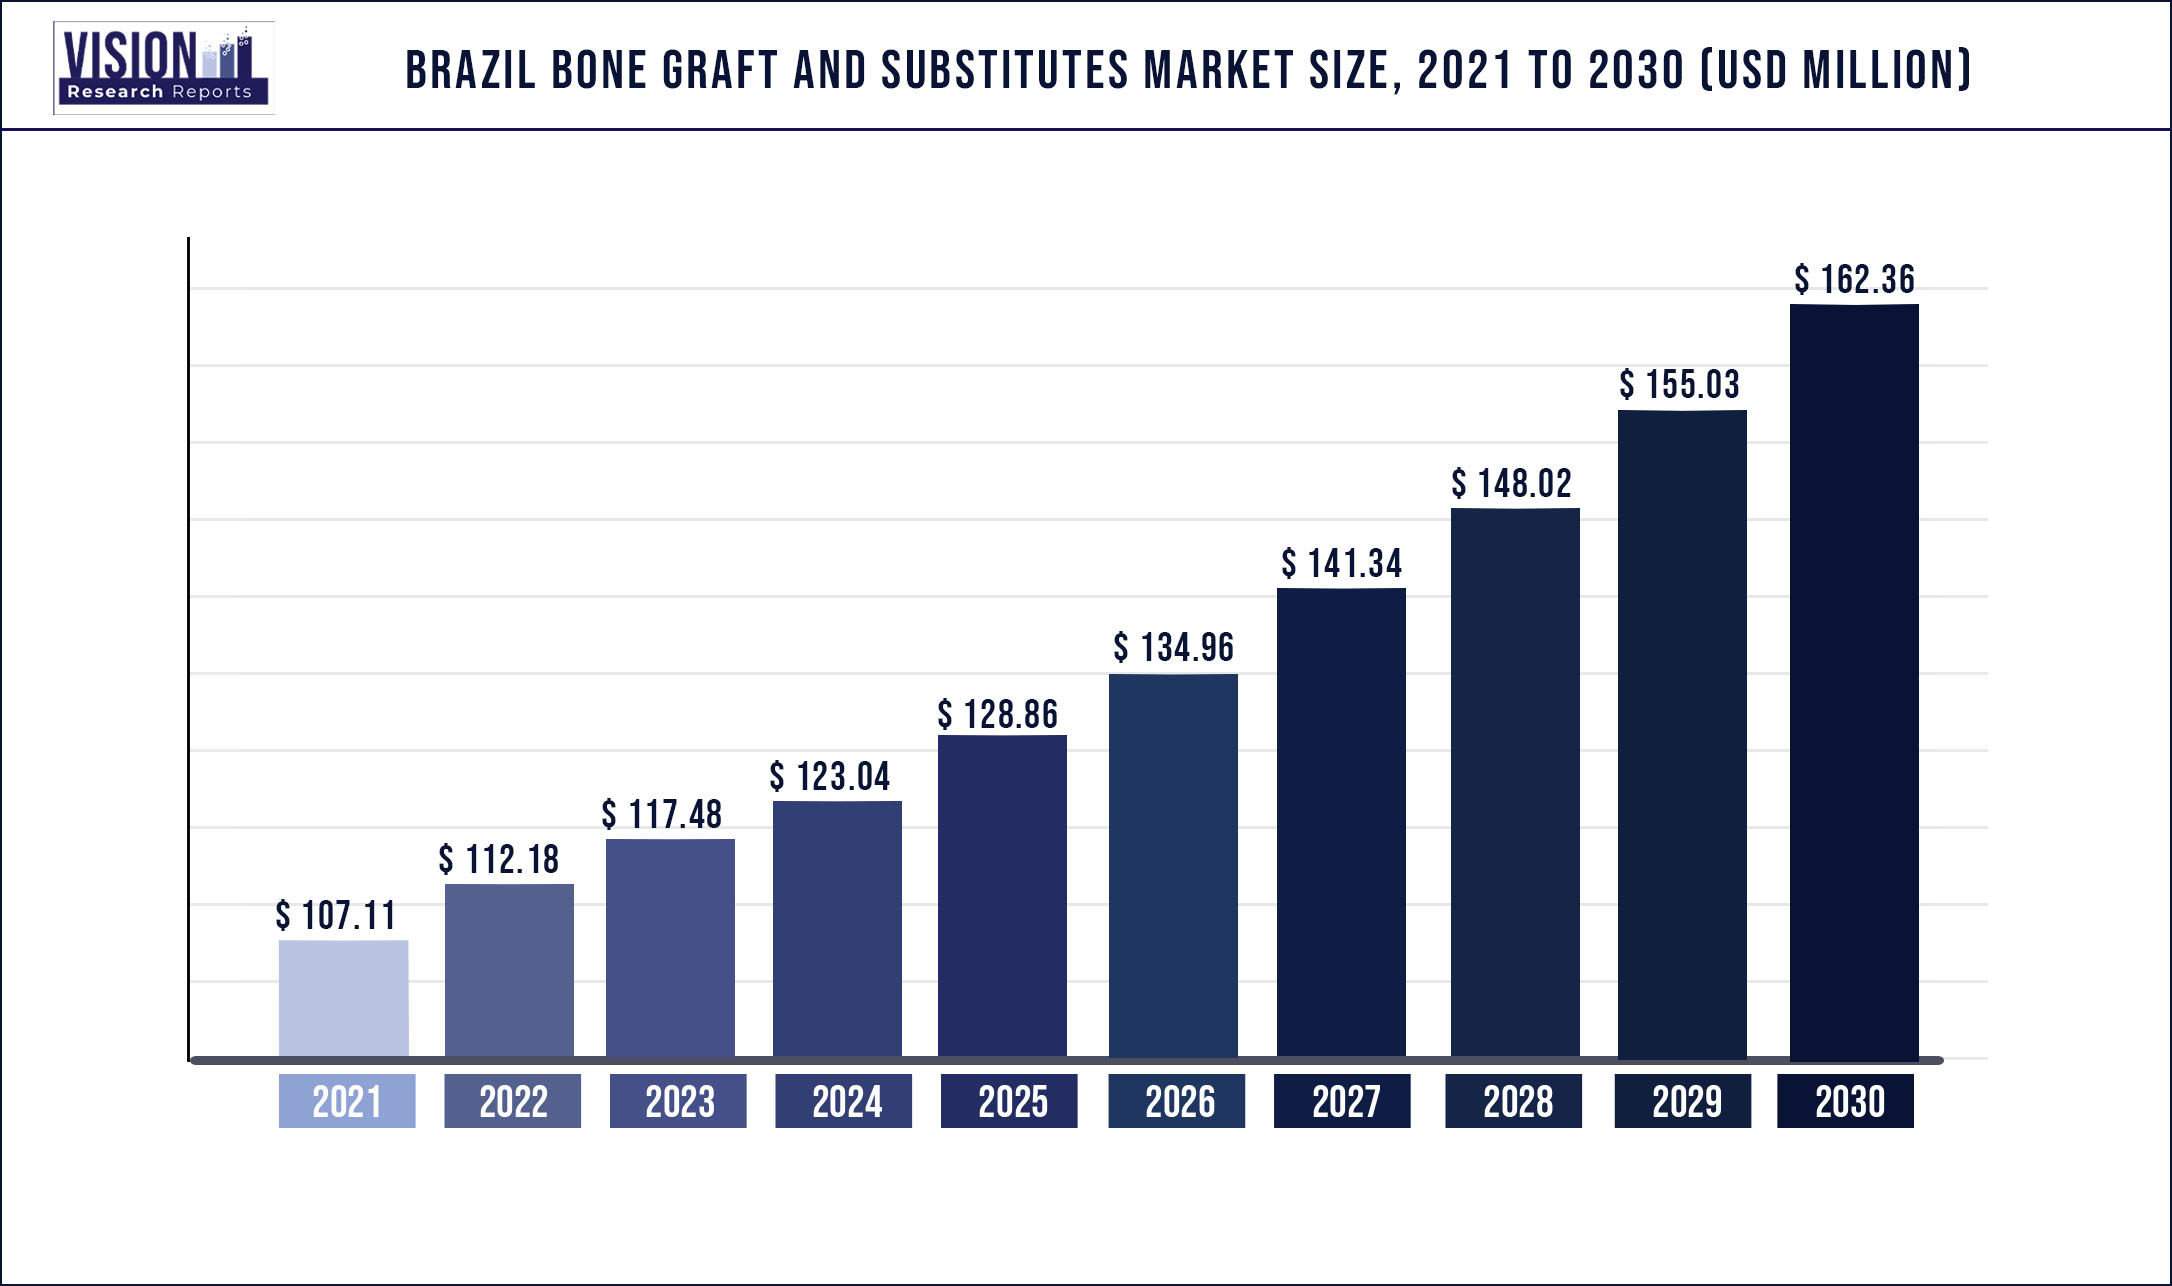 Brazil Bone Graft And Substitutes Market Size 2021 to 2030